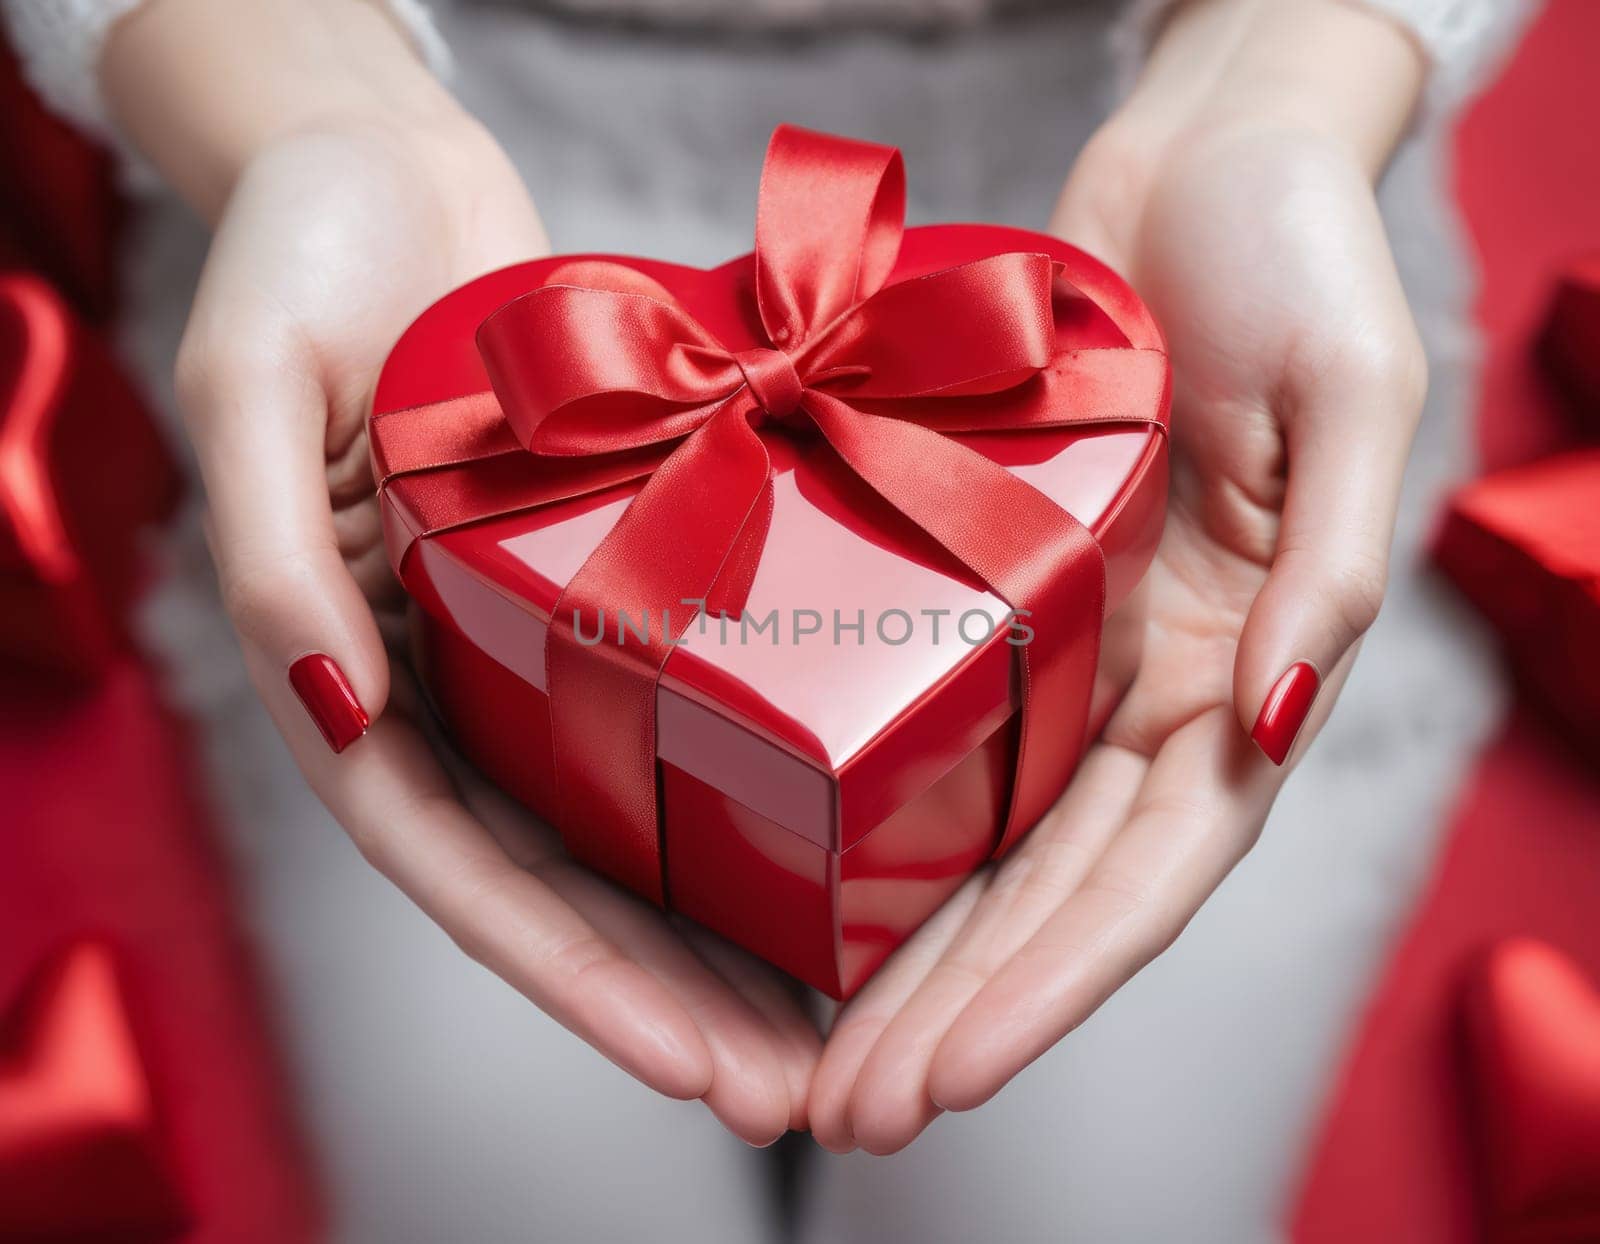 Pair of Hands Holding Heart-Shaped Gift Bo by Andre1ns